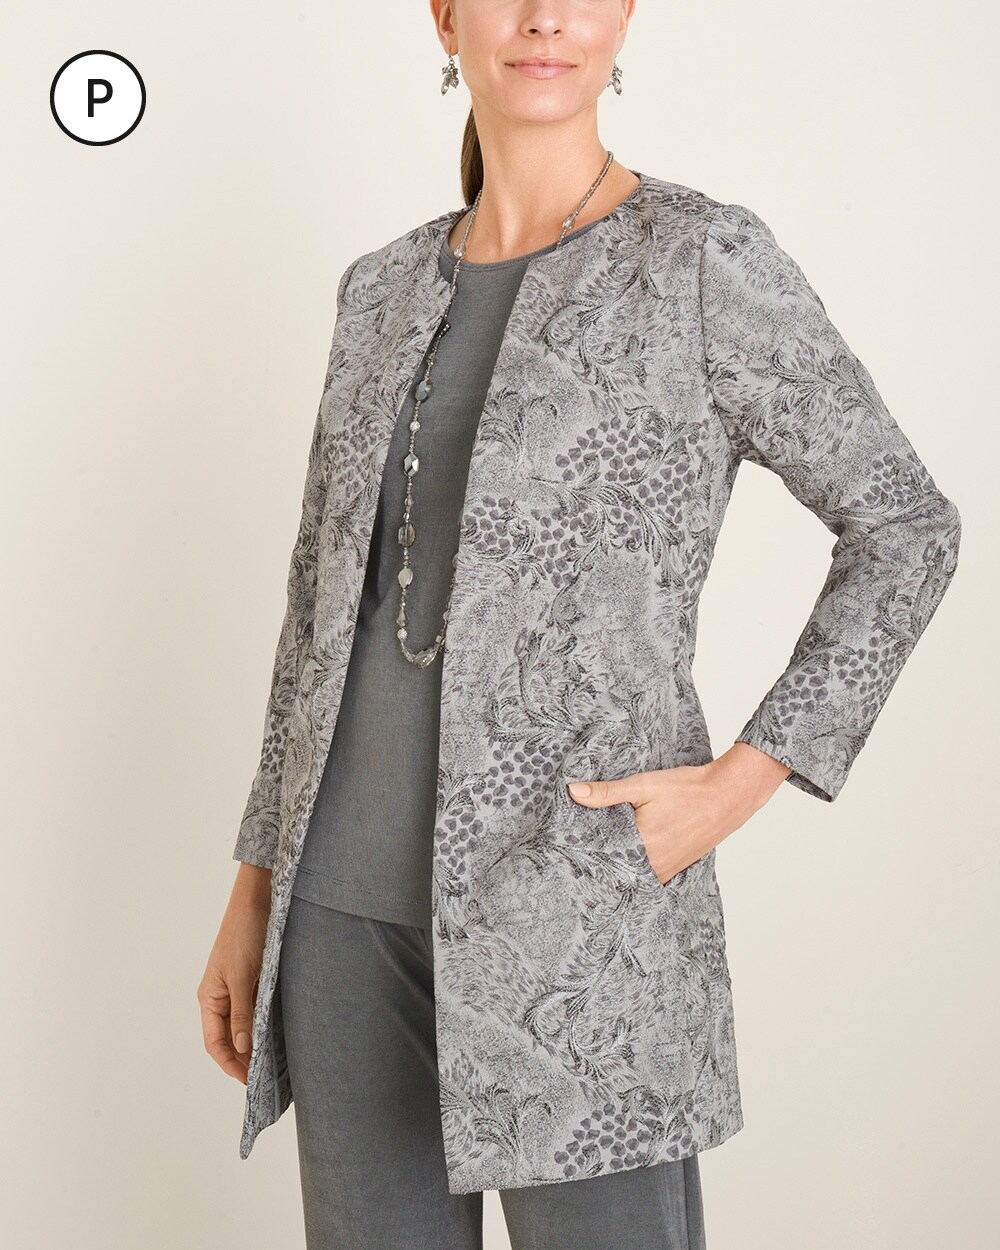 Travelers Collection Petite Gray Printed Jacket